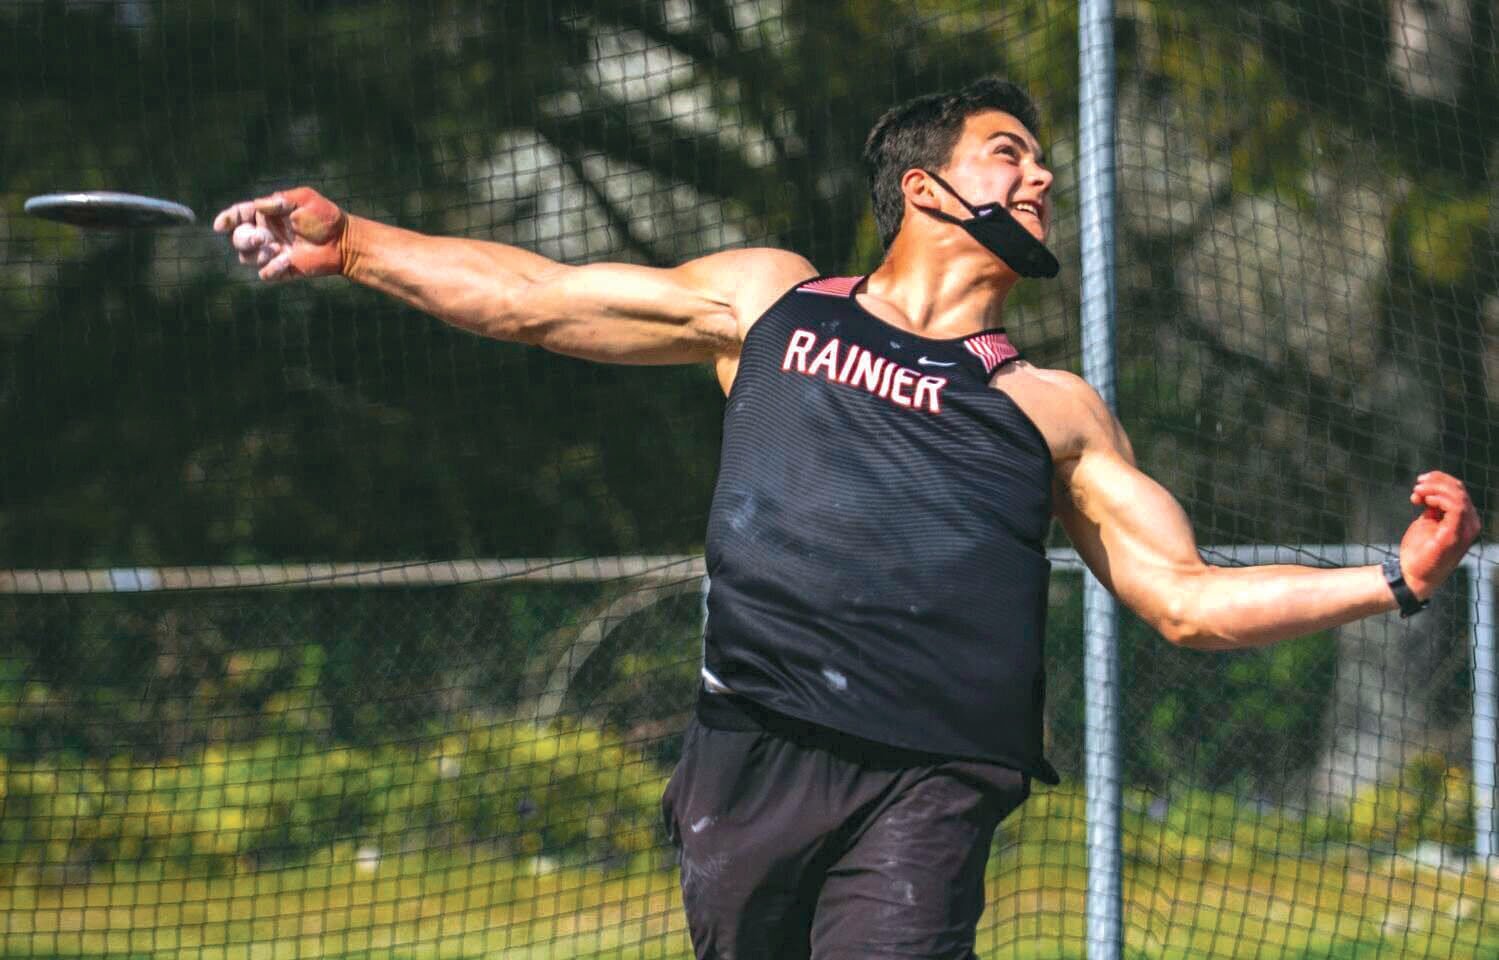 Rainier junior Jeremiah Nubbe broke the Washington state junior discus throw record with a toss of 196 feet even at a meet in Tenino.